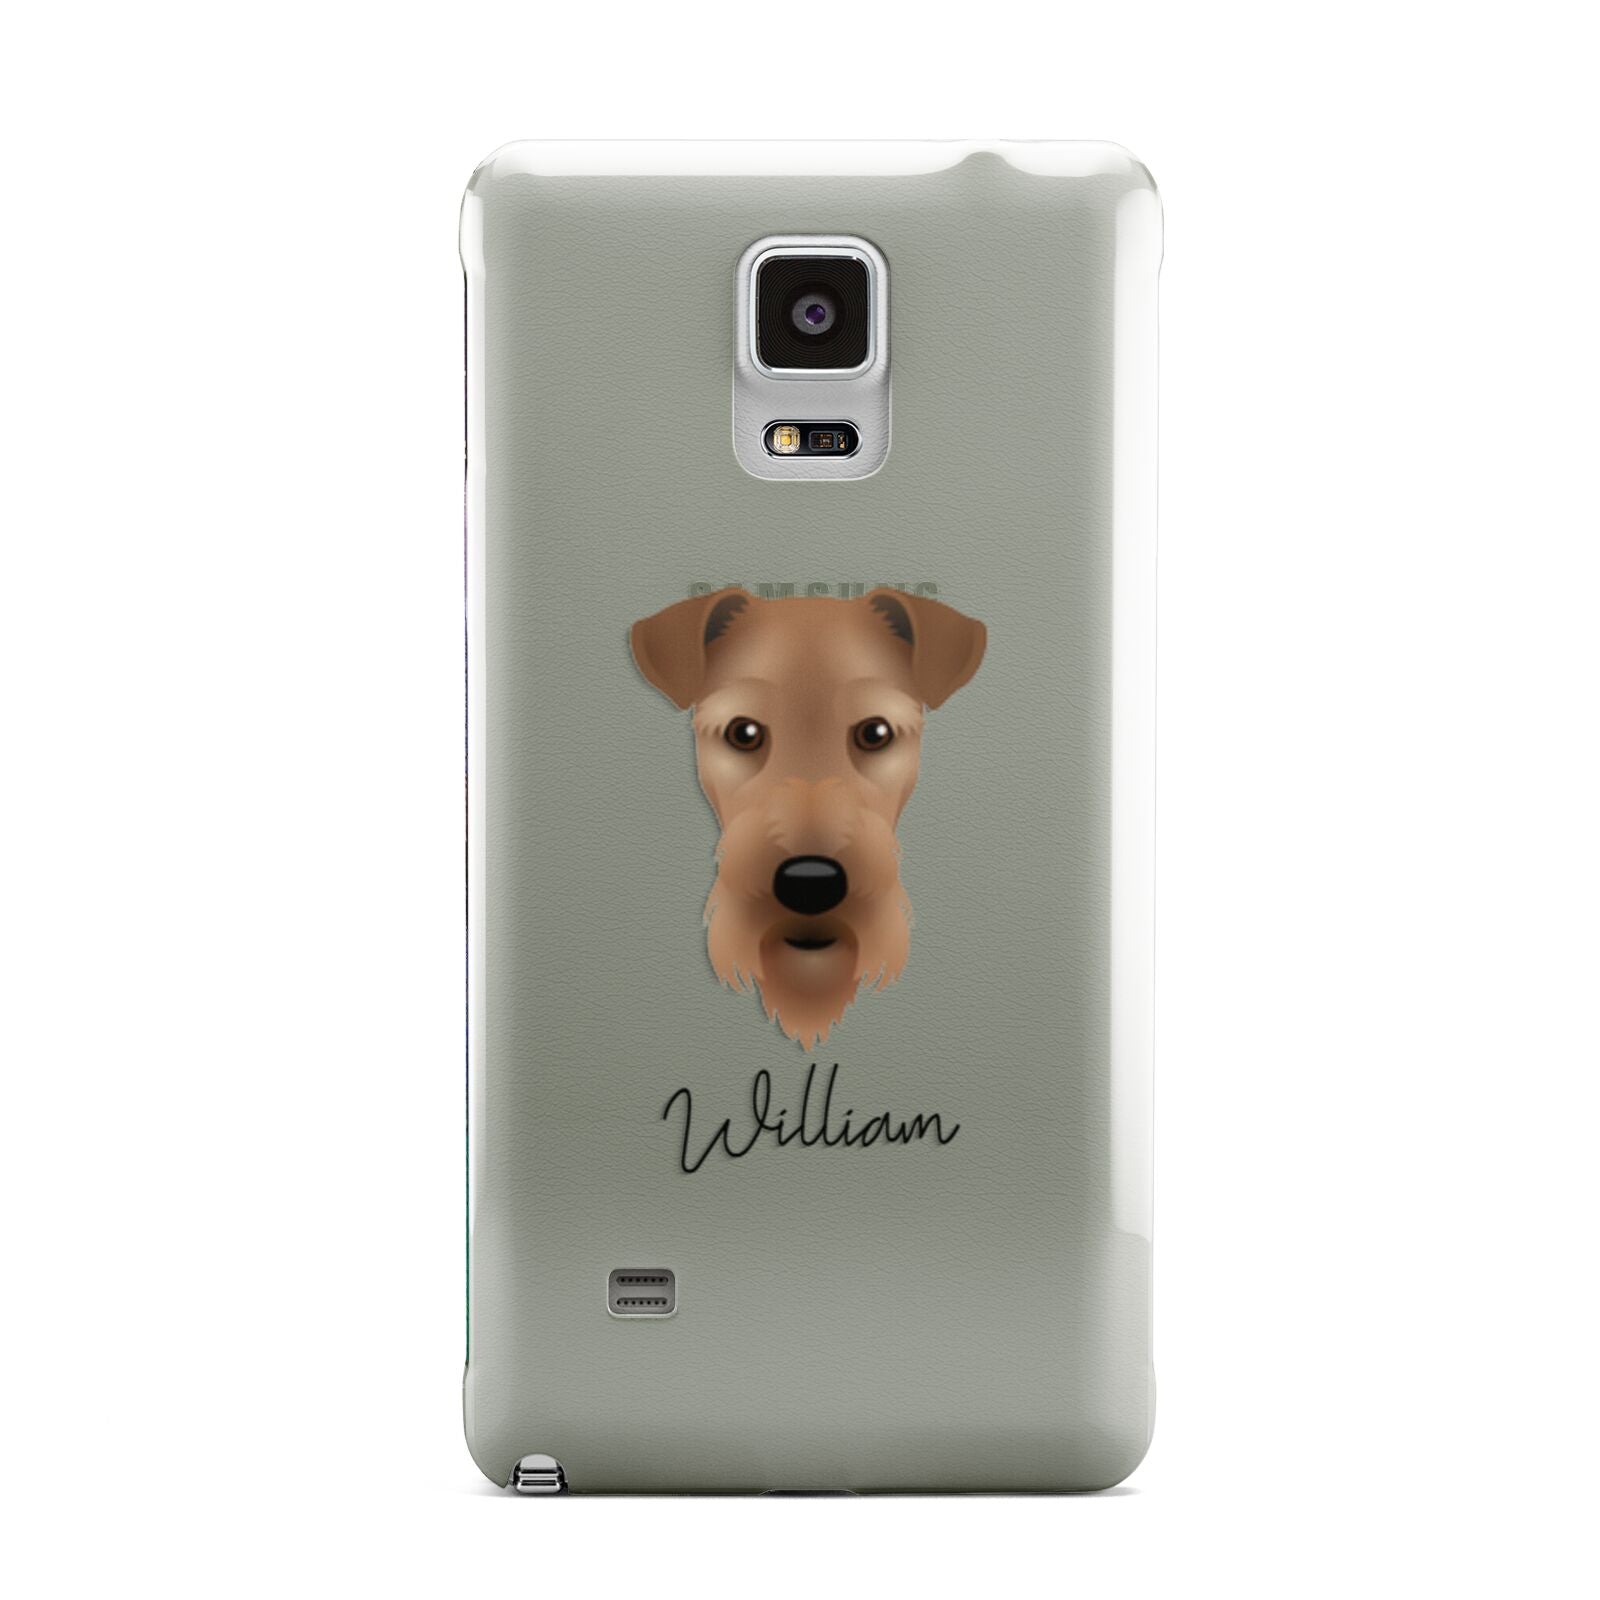 Airedale Terrier Personalised Samsung Galaxy Note 4 Case